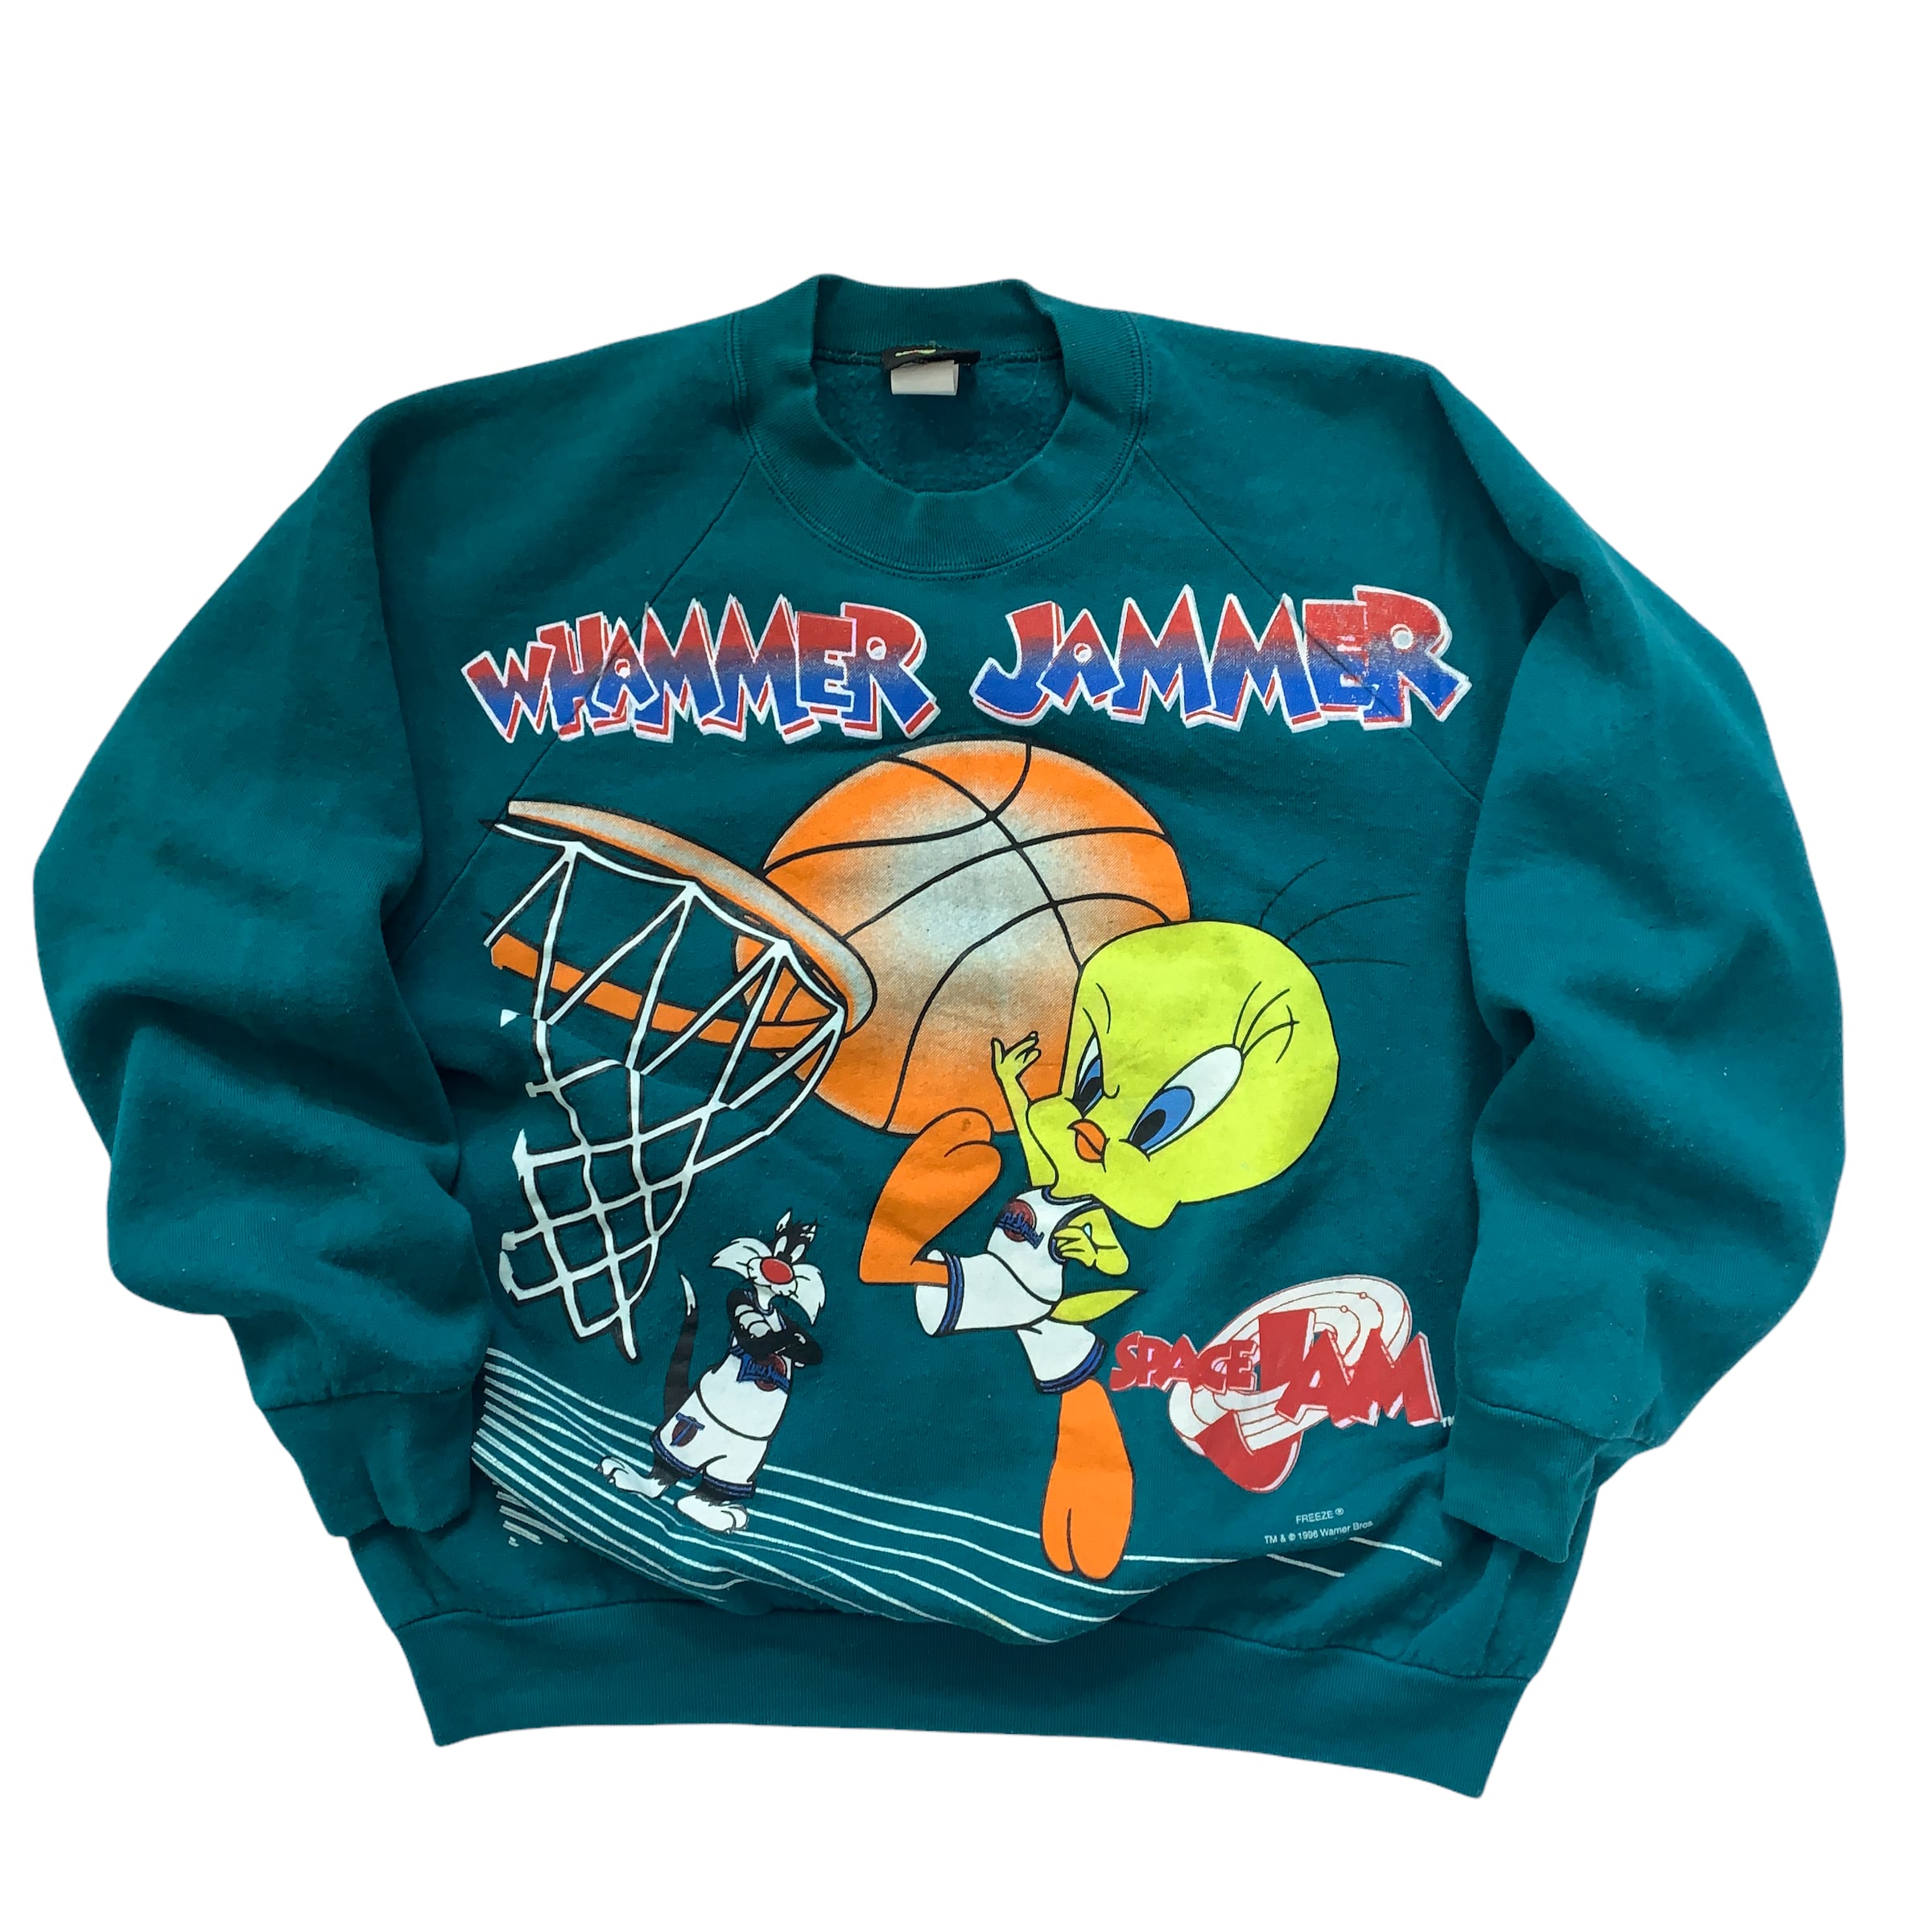 90's~ SPACE JAM キャラクタープリントスウェット USA製 SIZE M ...